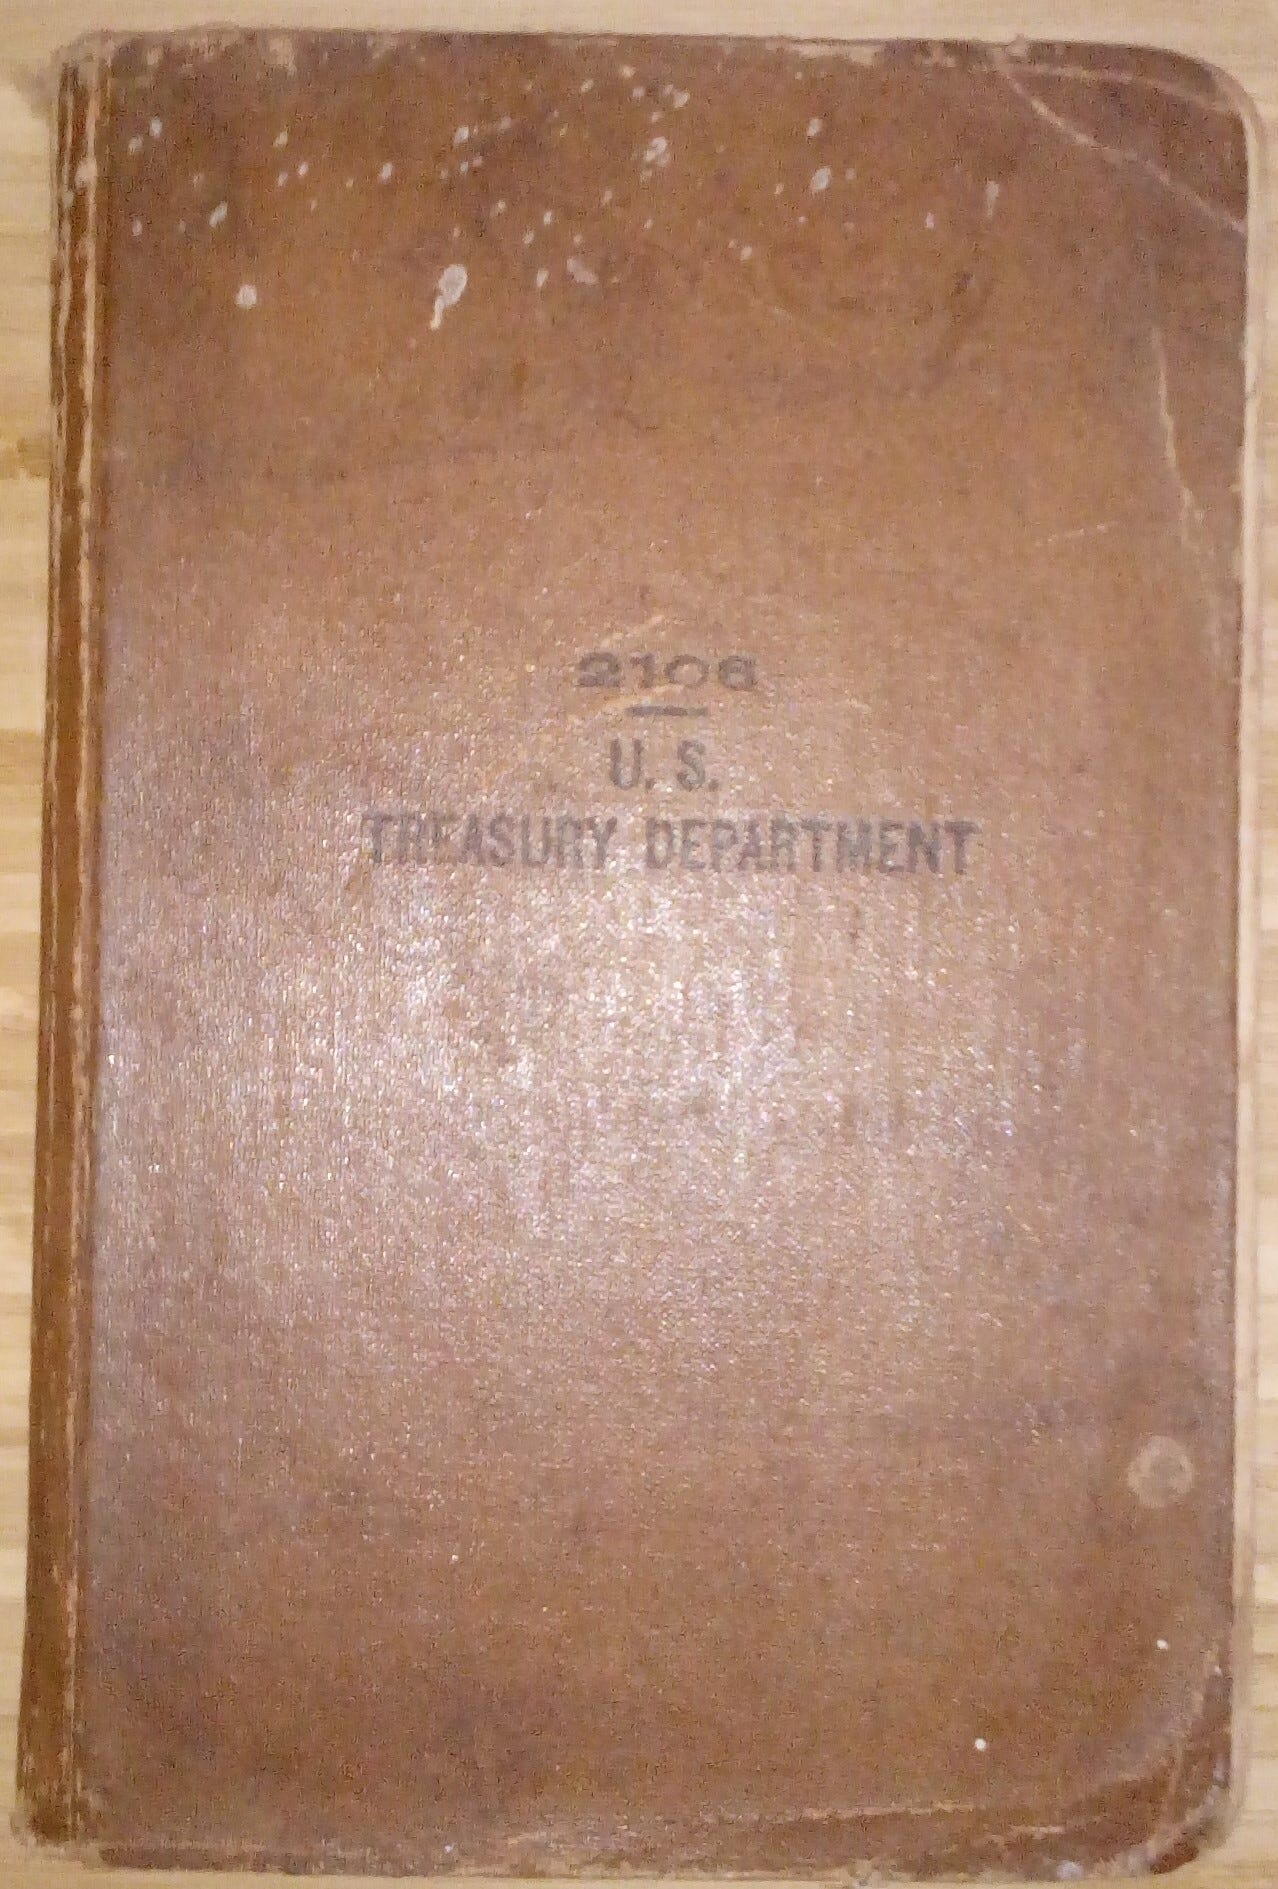 Photograph of a brown book with the words “2106 – U.S. Treasury Department” printed on it in black